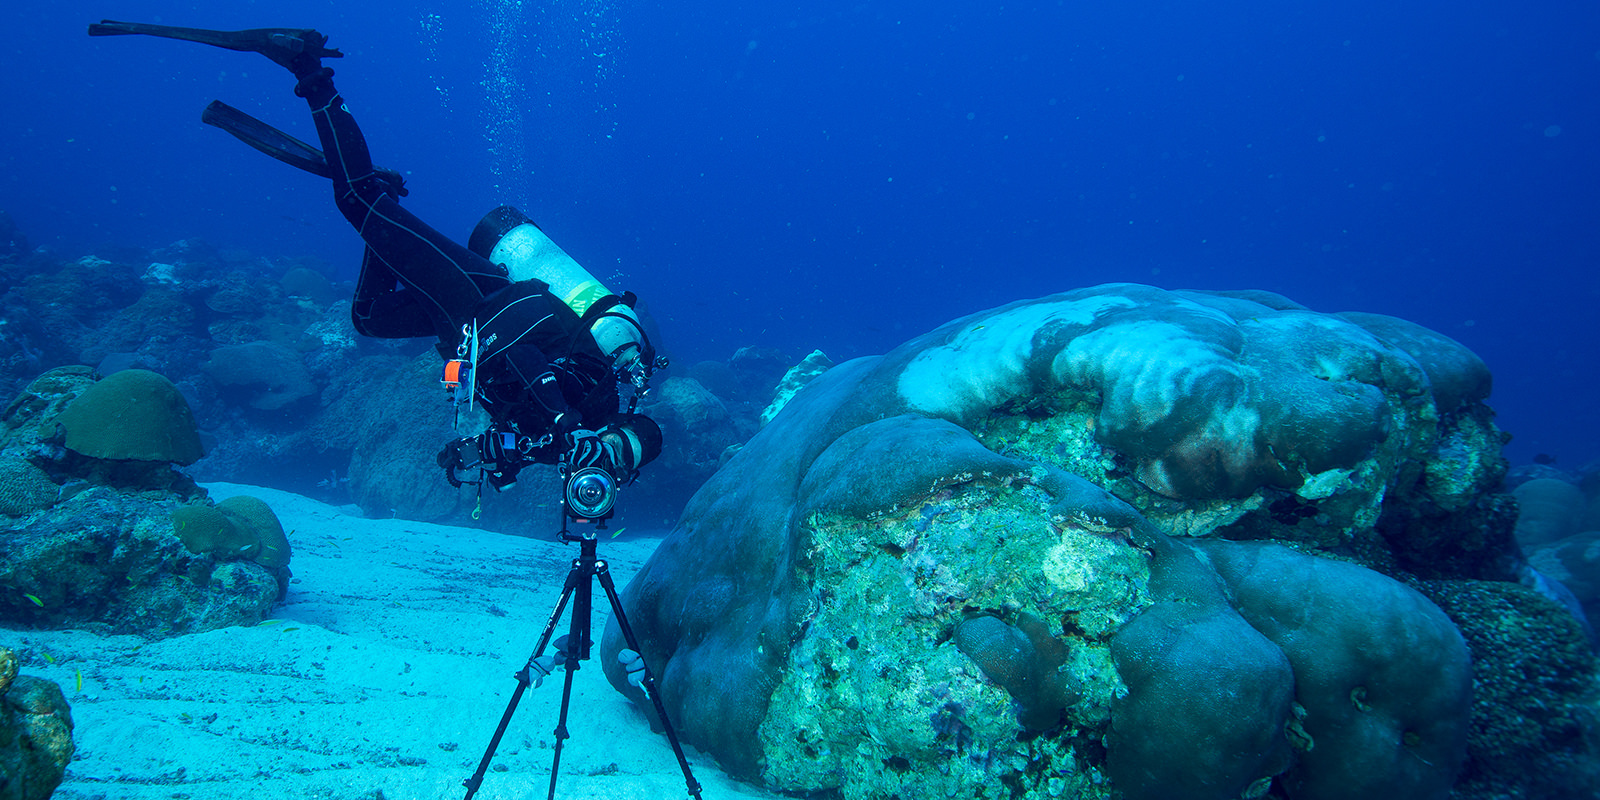 diver taking a photograph